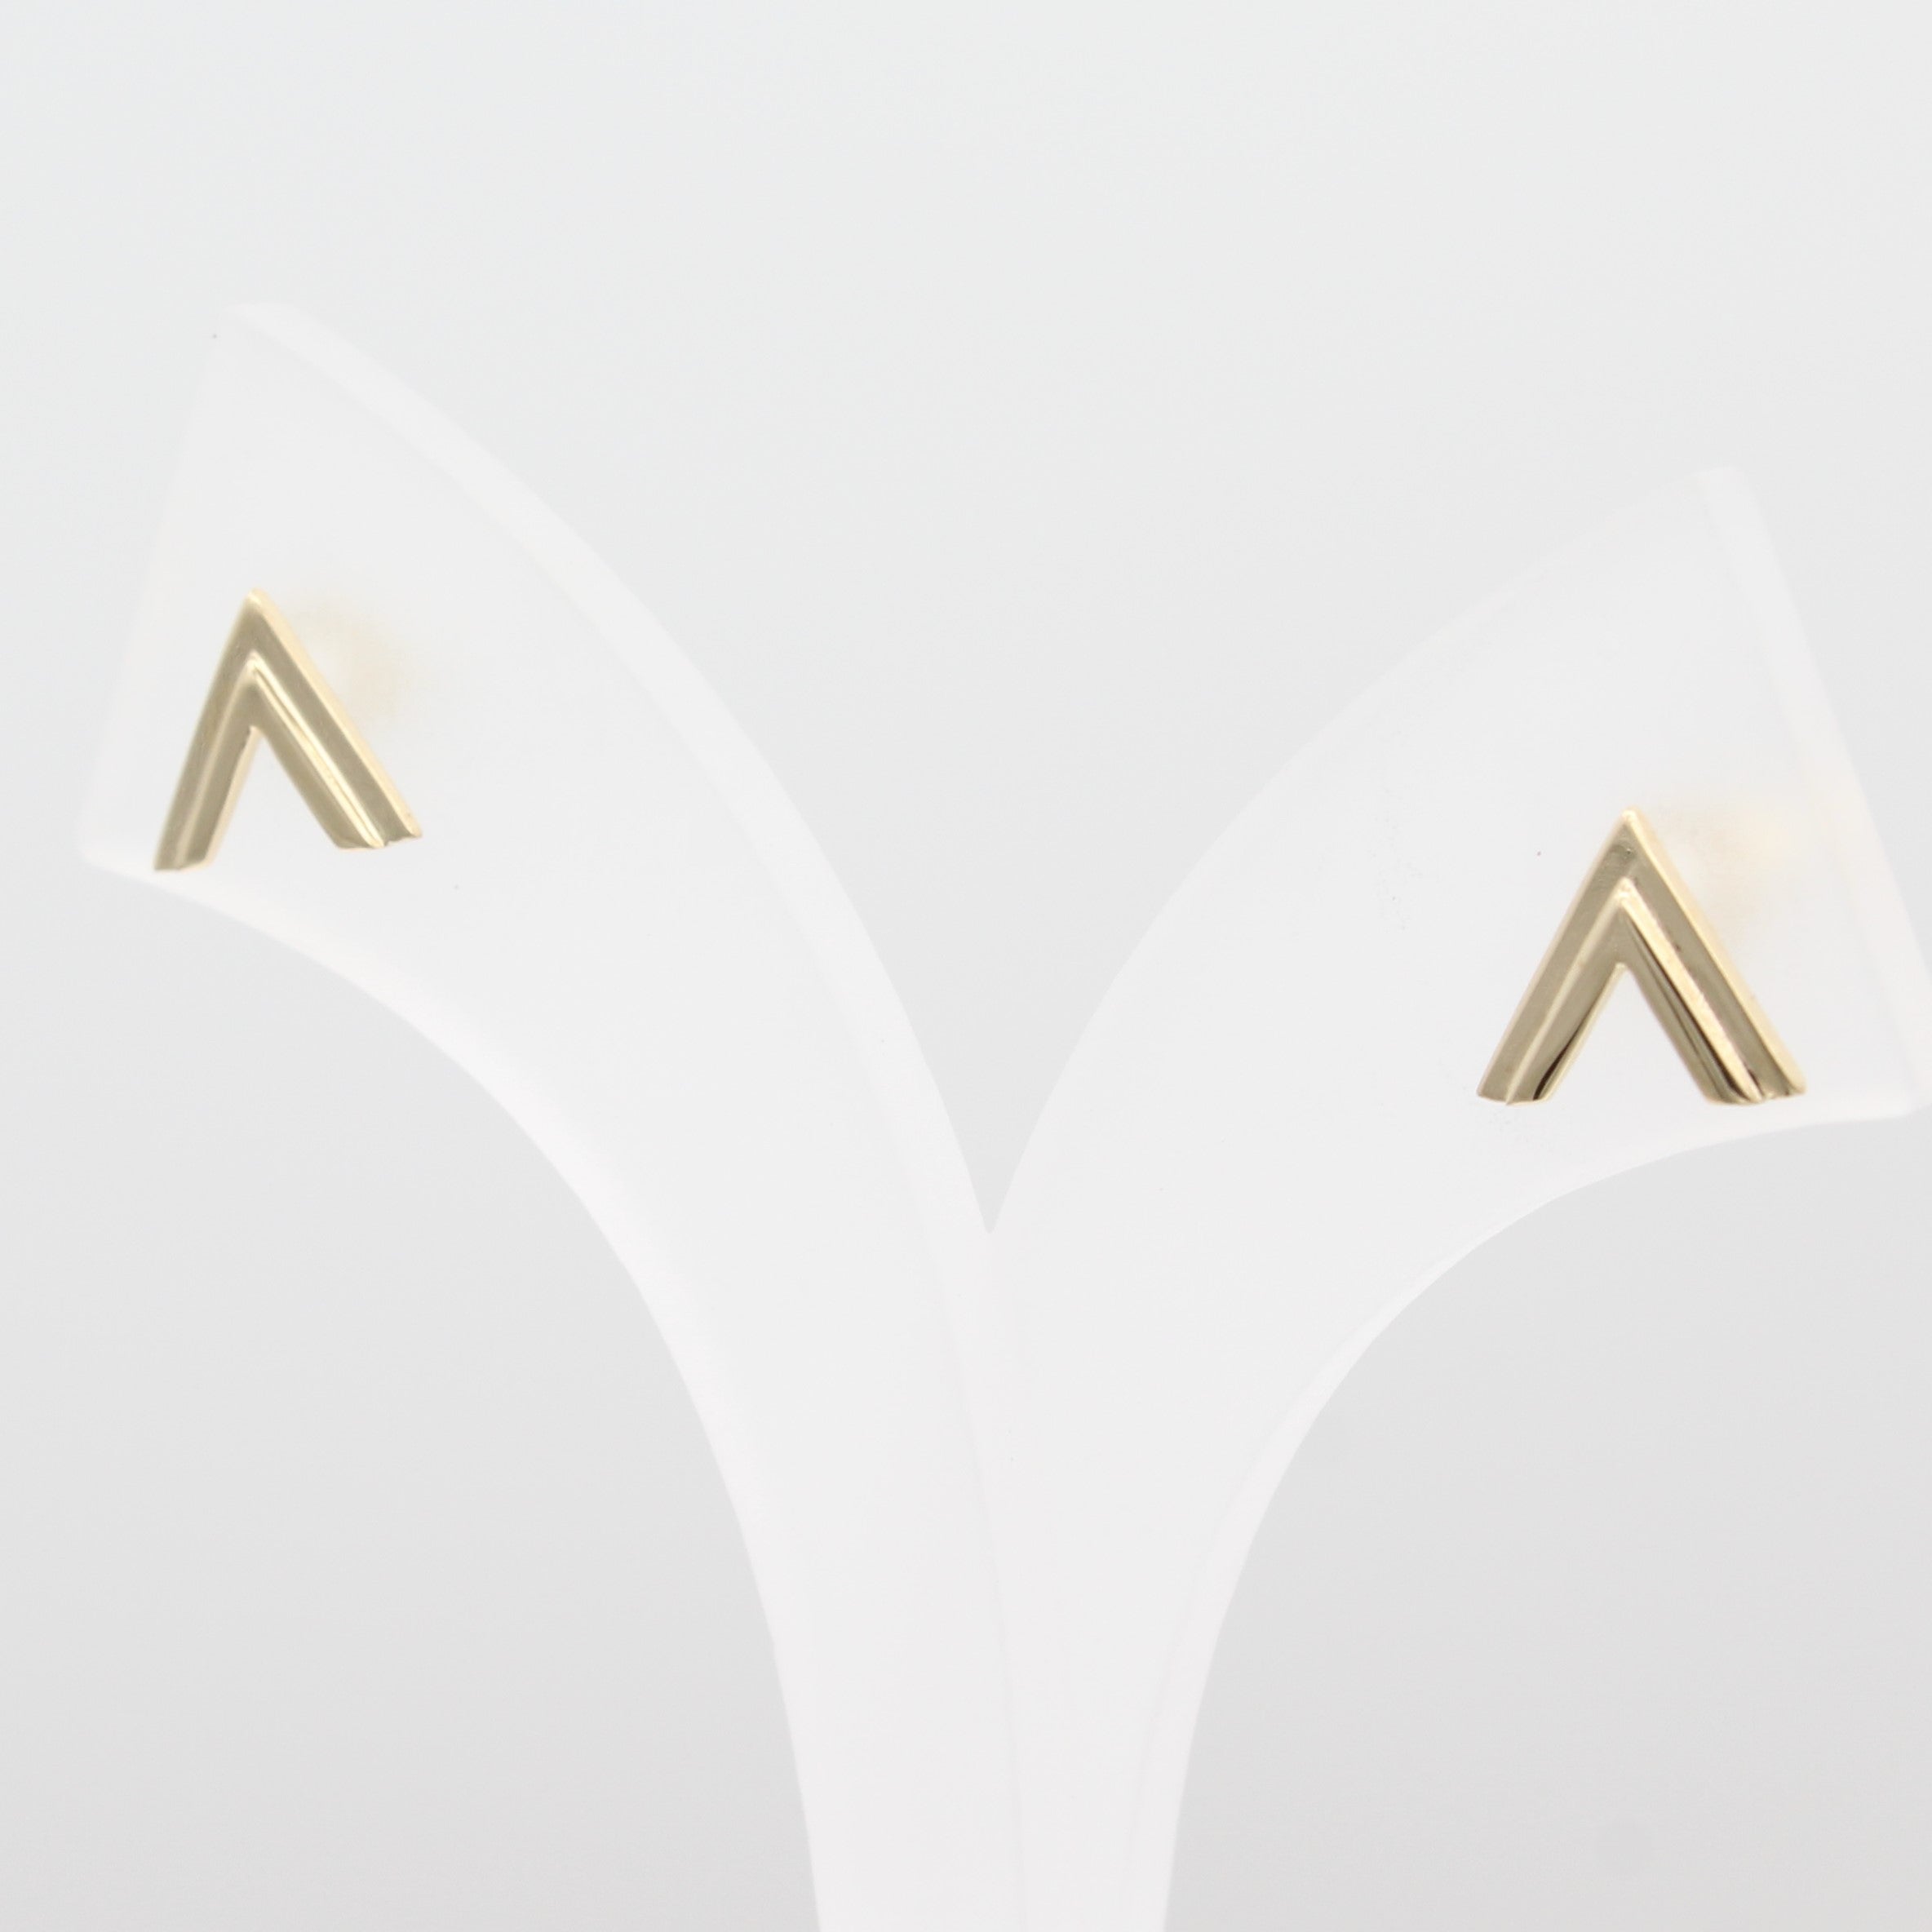 A close-up view of 14k Yellow Gold Double Chevron Earrings on a white jewelry display.